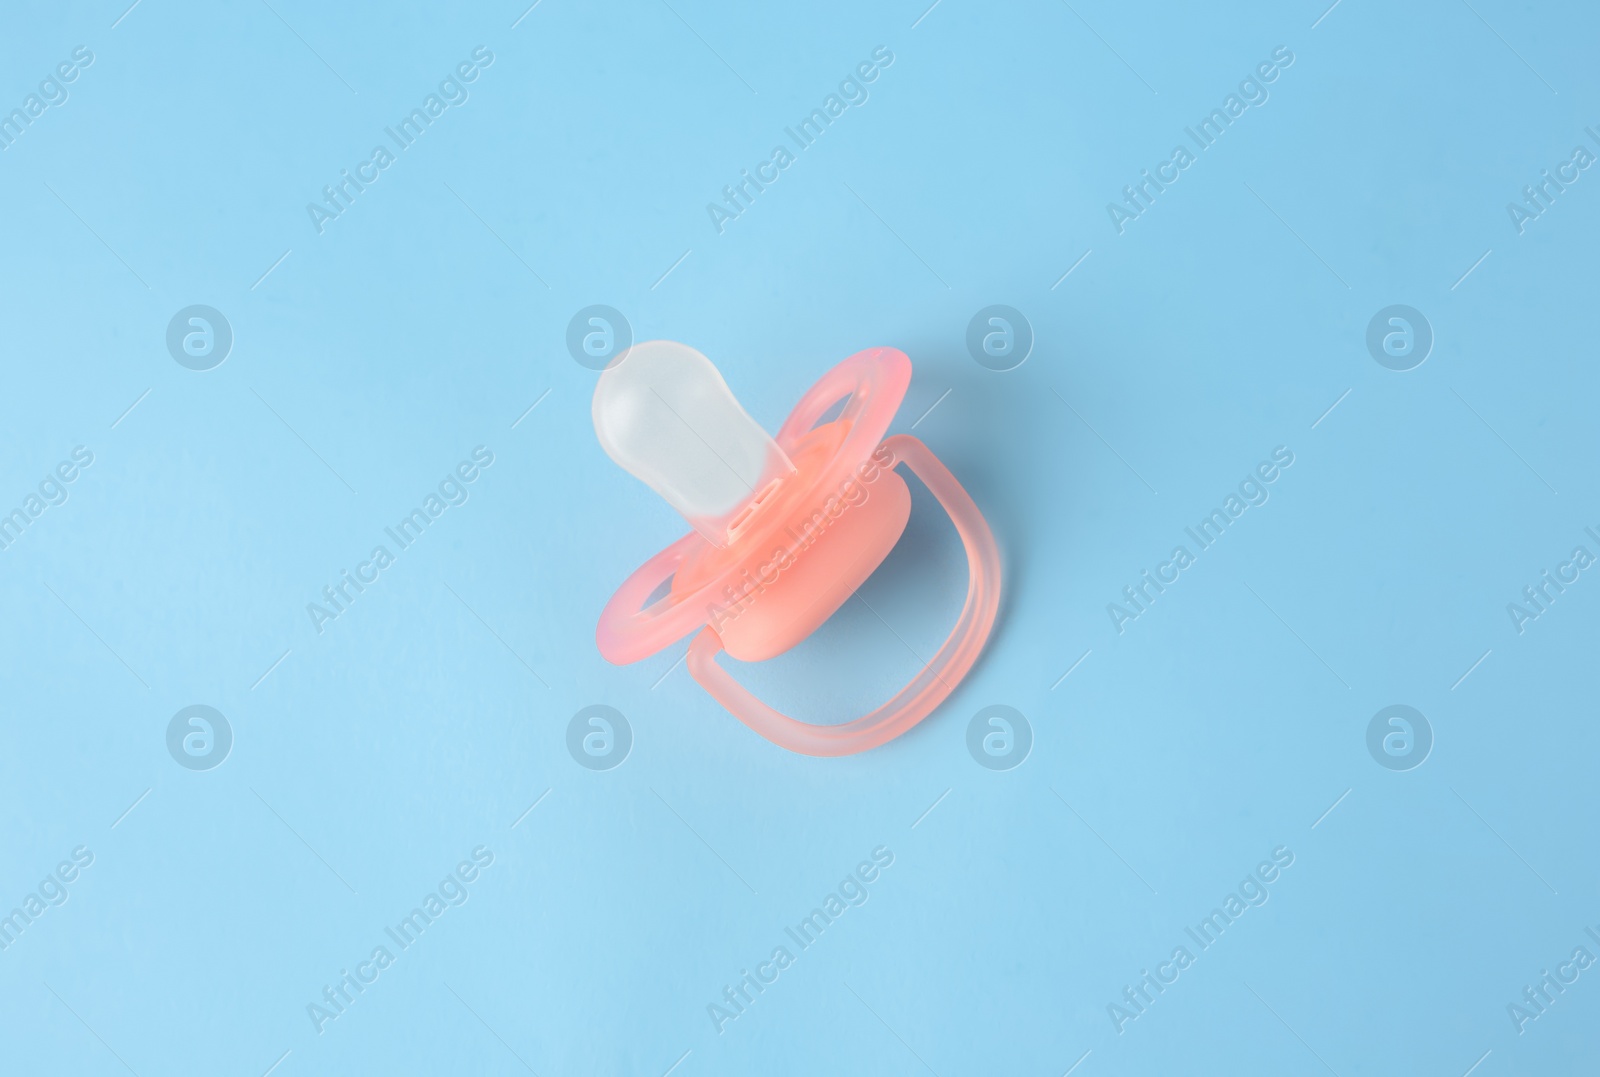 Photo of One new baby pacifier on light blue background, top view